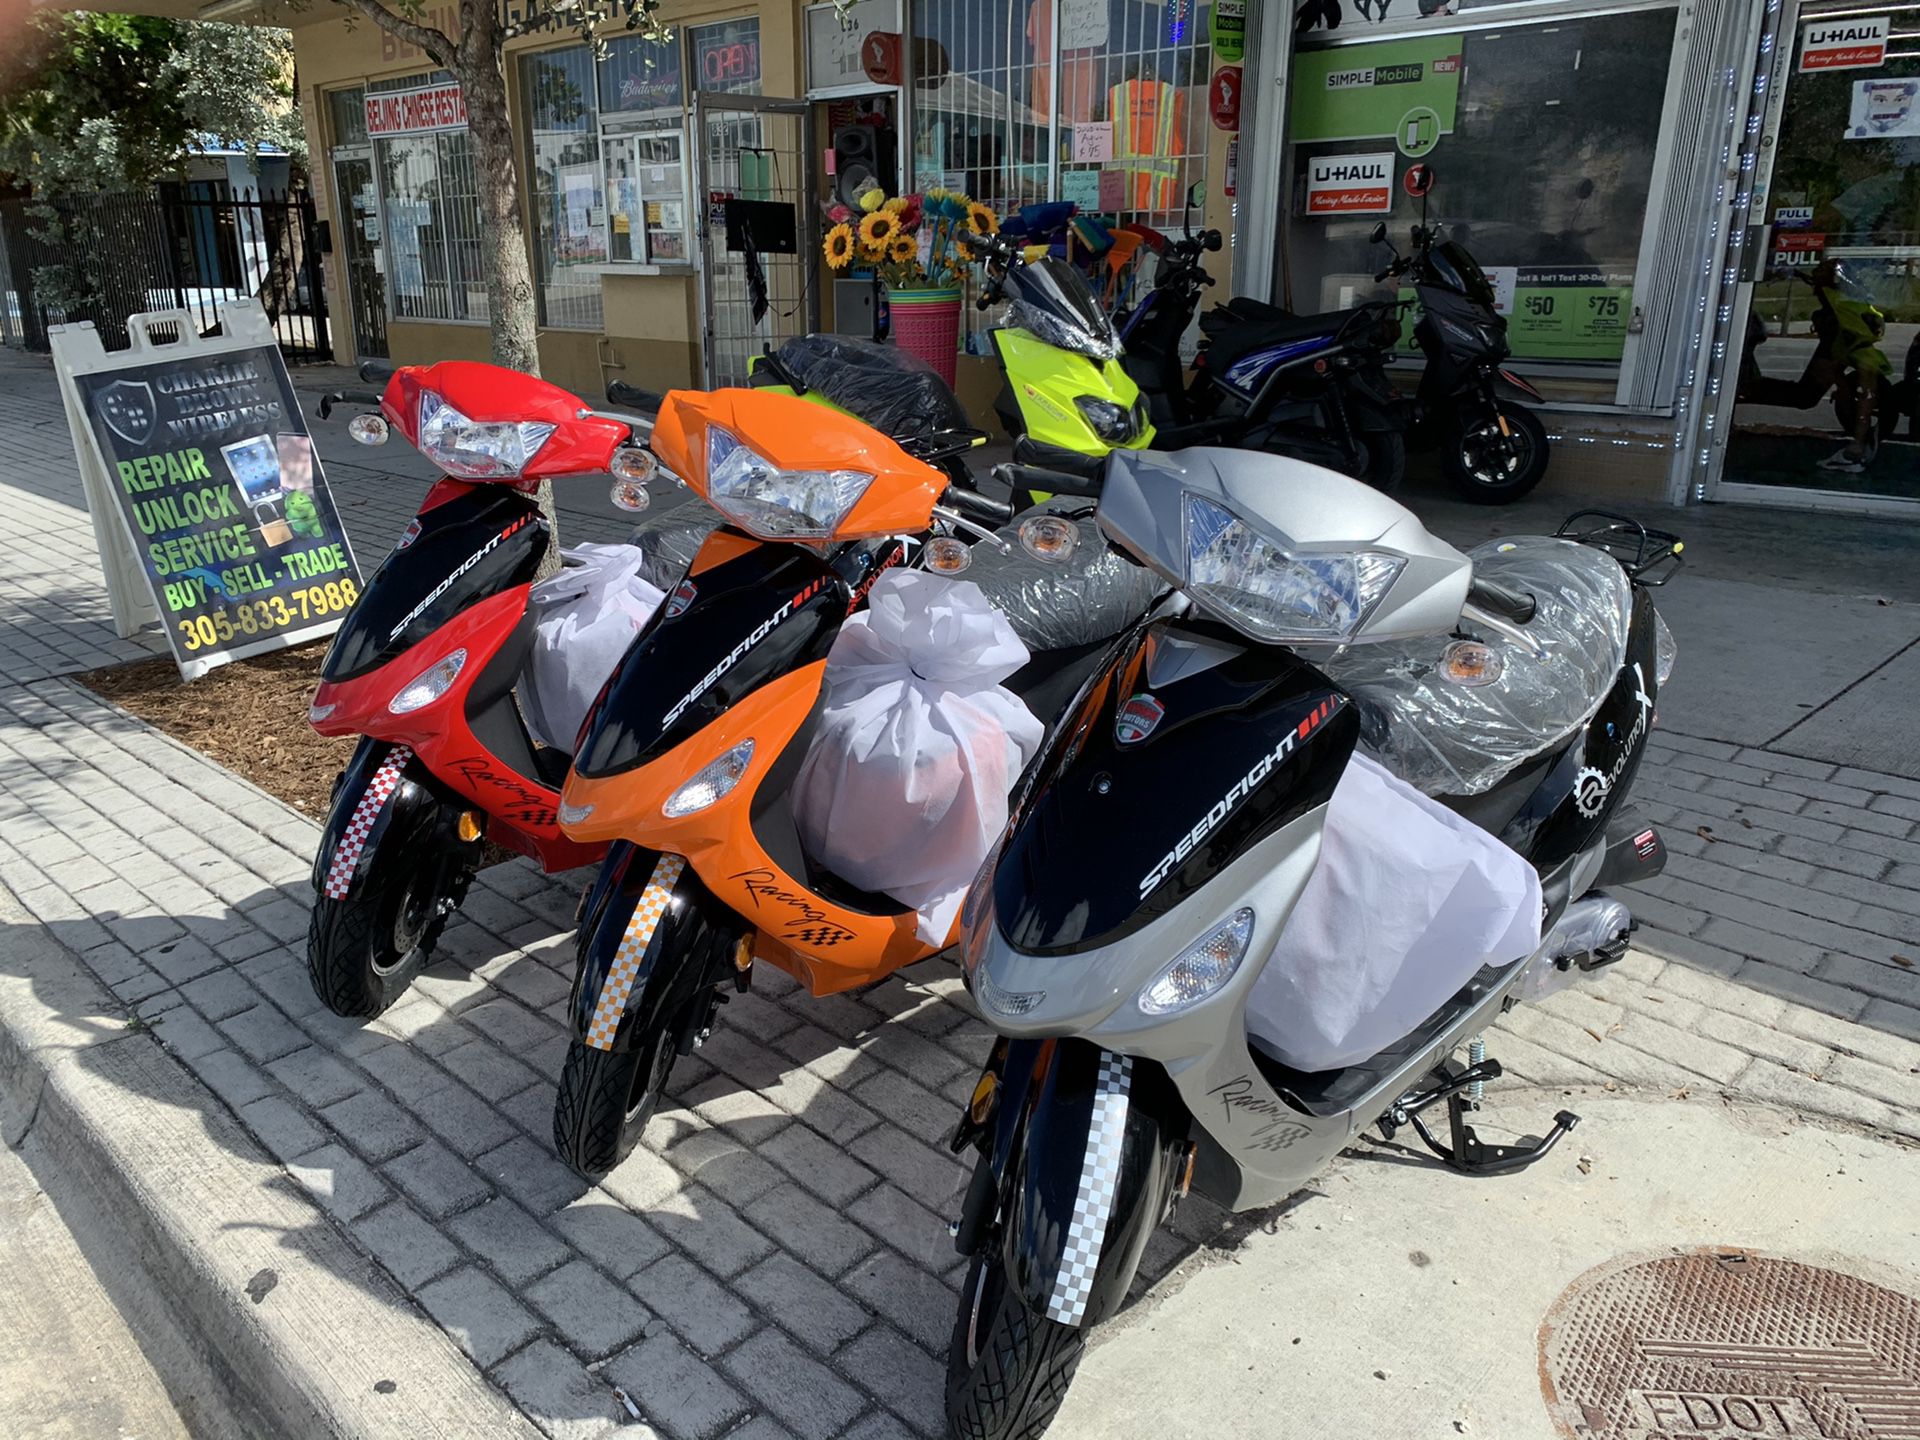 Scooters. All day. New 0 miles. 838 west Flagler Miami